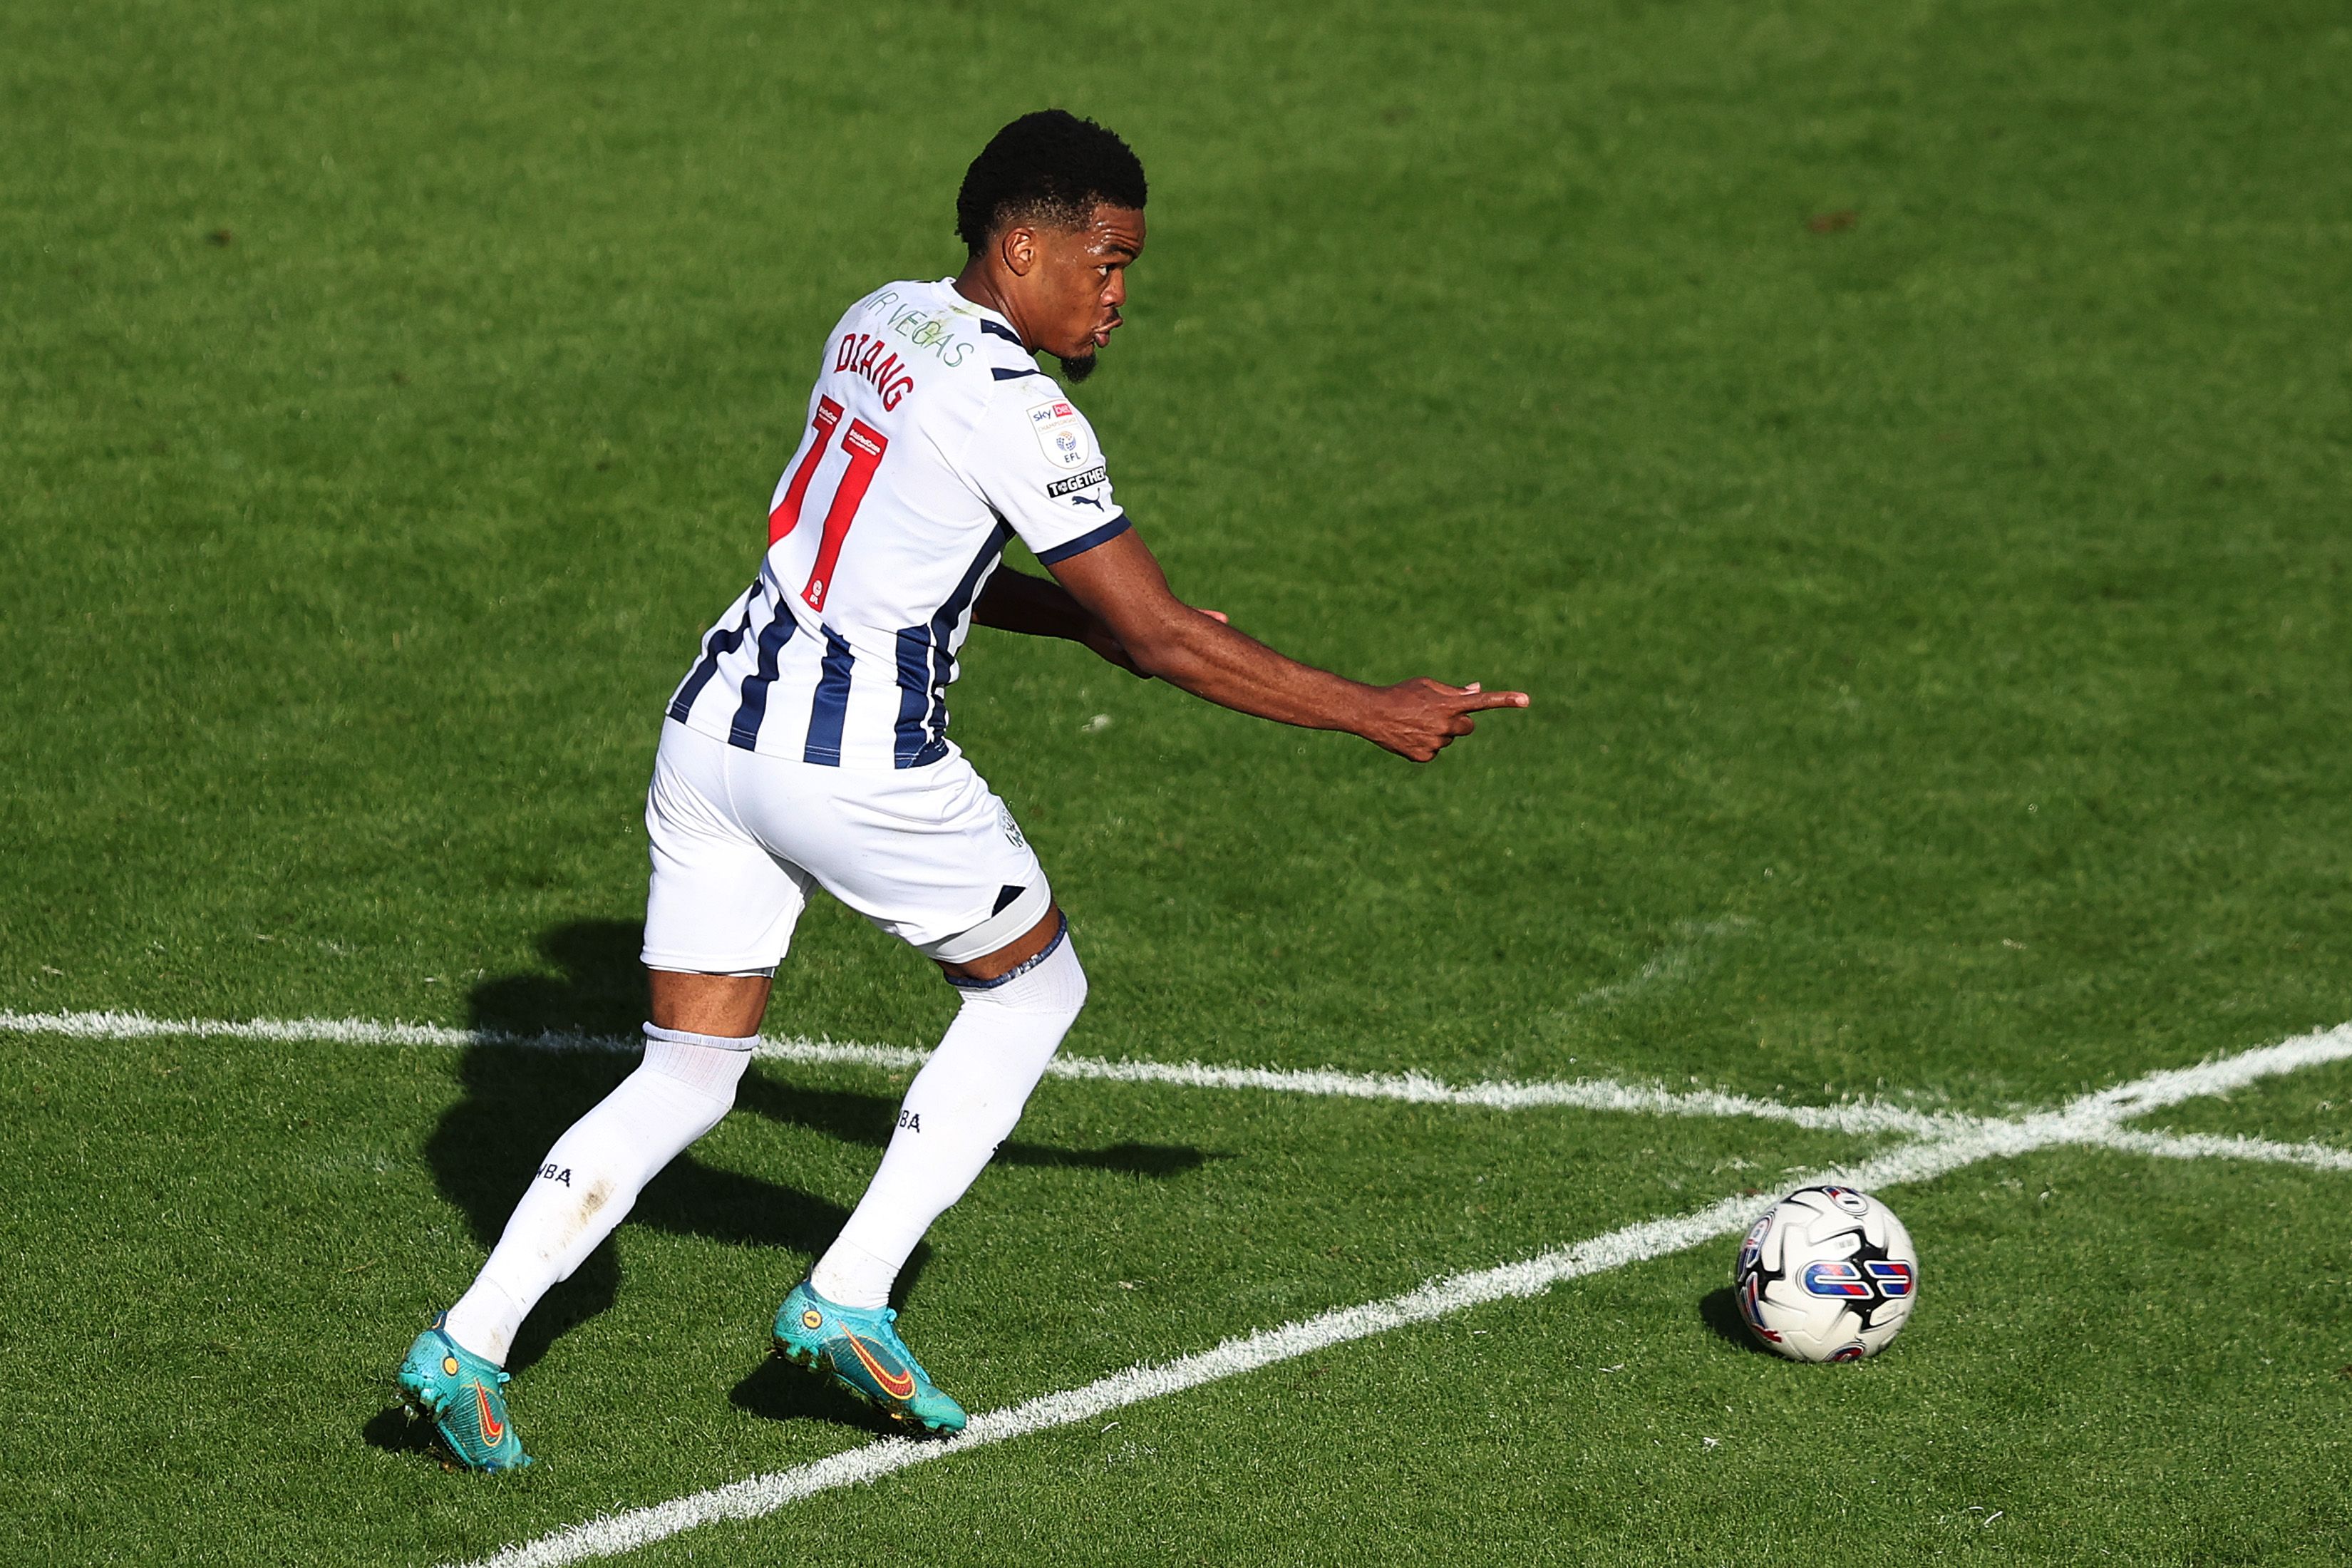 Grady Diangana in home Albion colours.